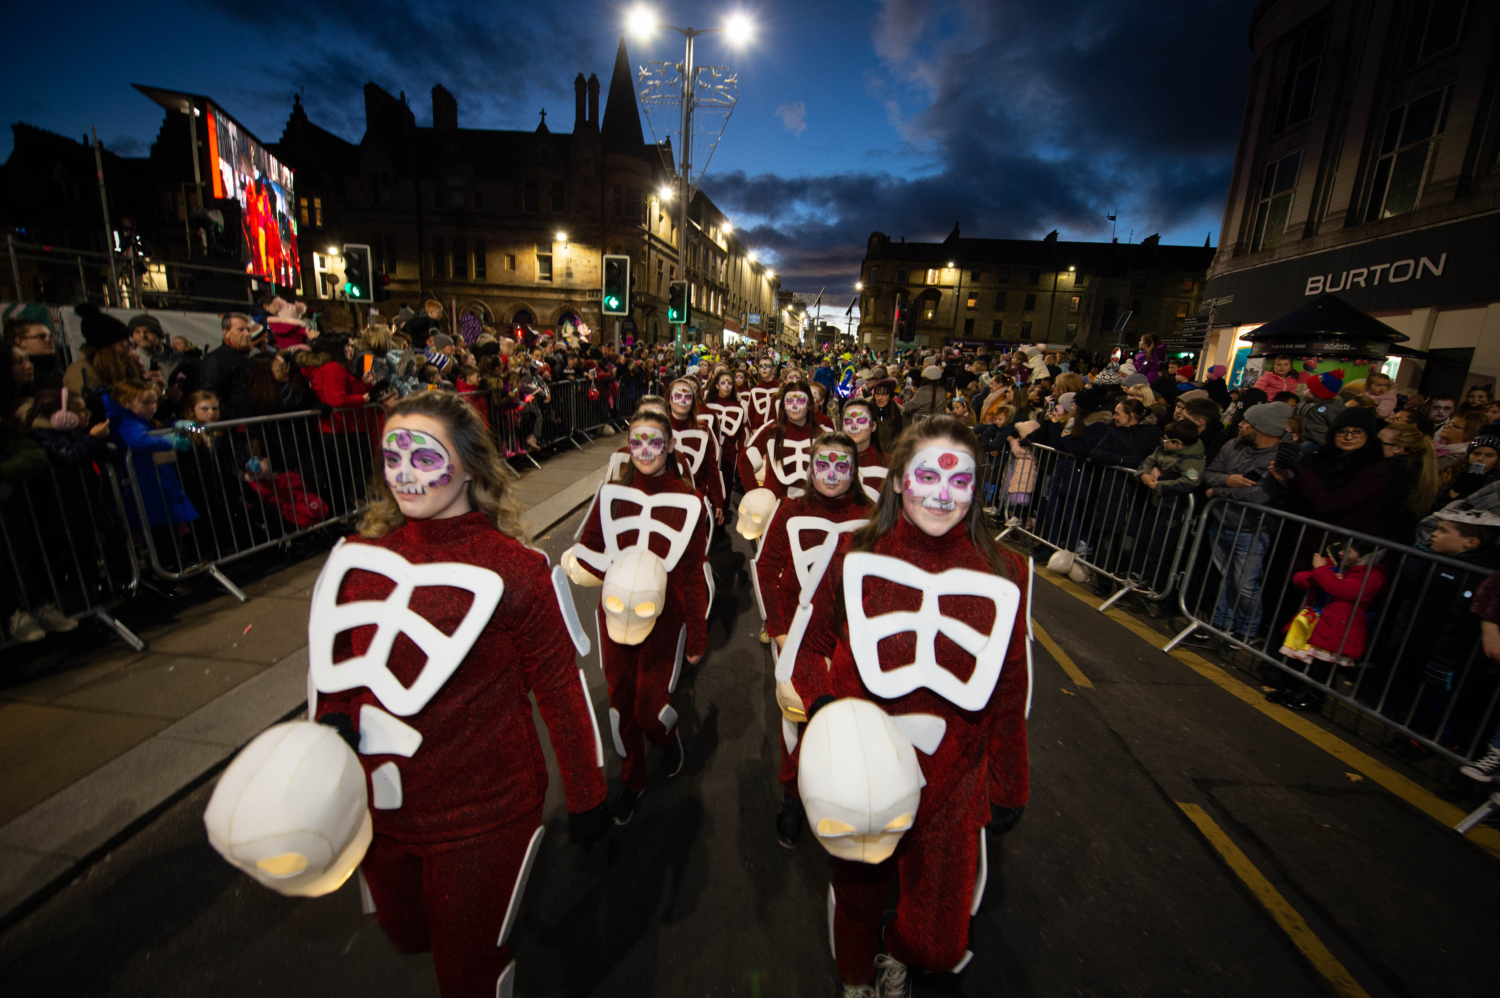 Groups invited to join Spooktacular parade for Paisley Halloween Festival - Paisley Scotland